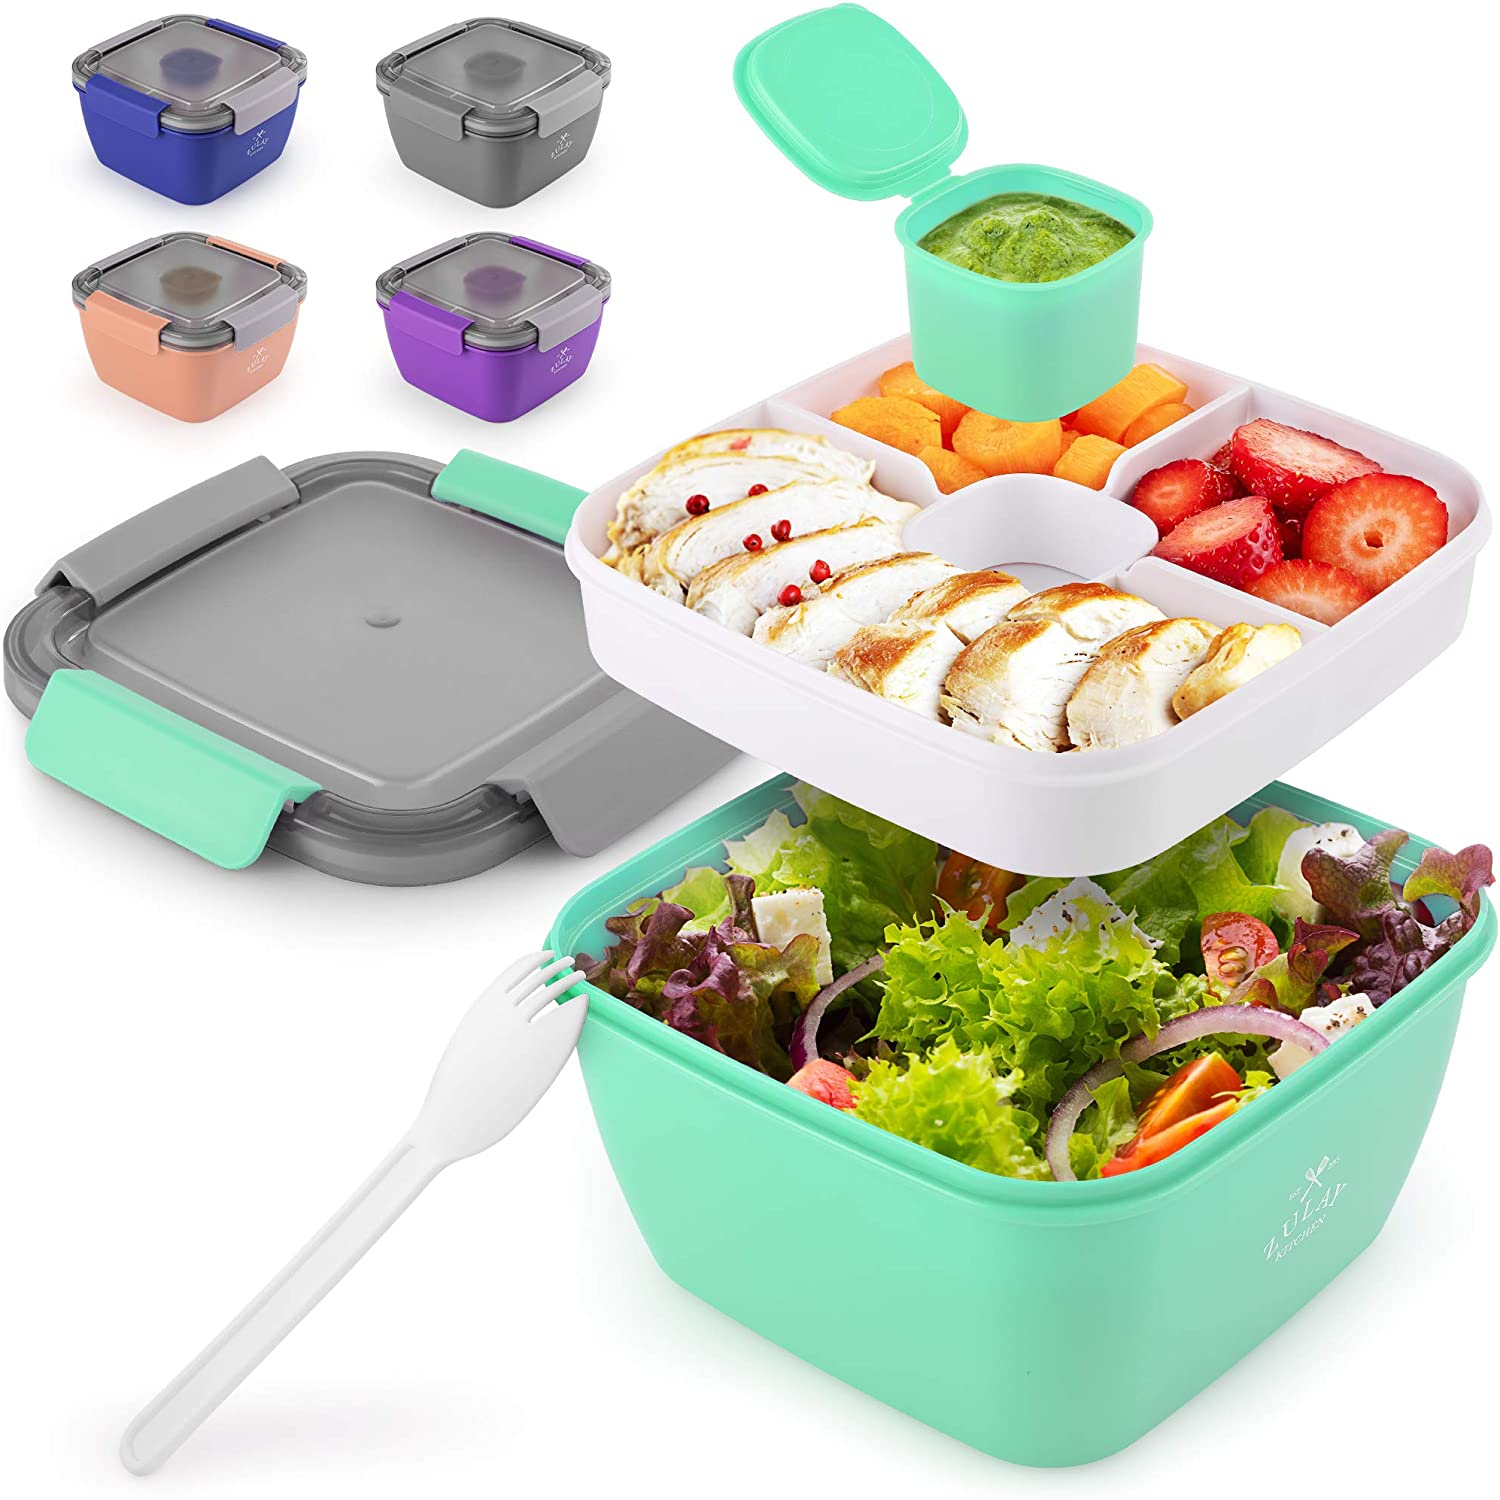 Aueoeo Leakproof Salad Dressing Container To Go, Stainless Steel